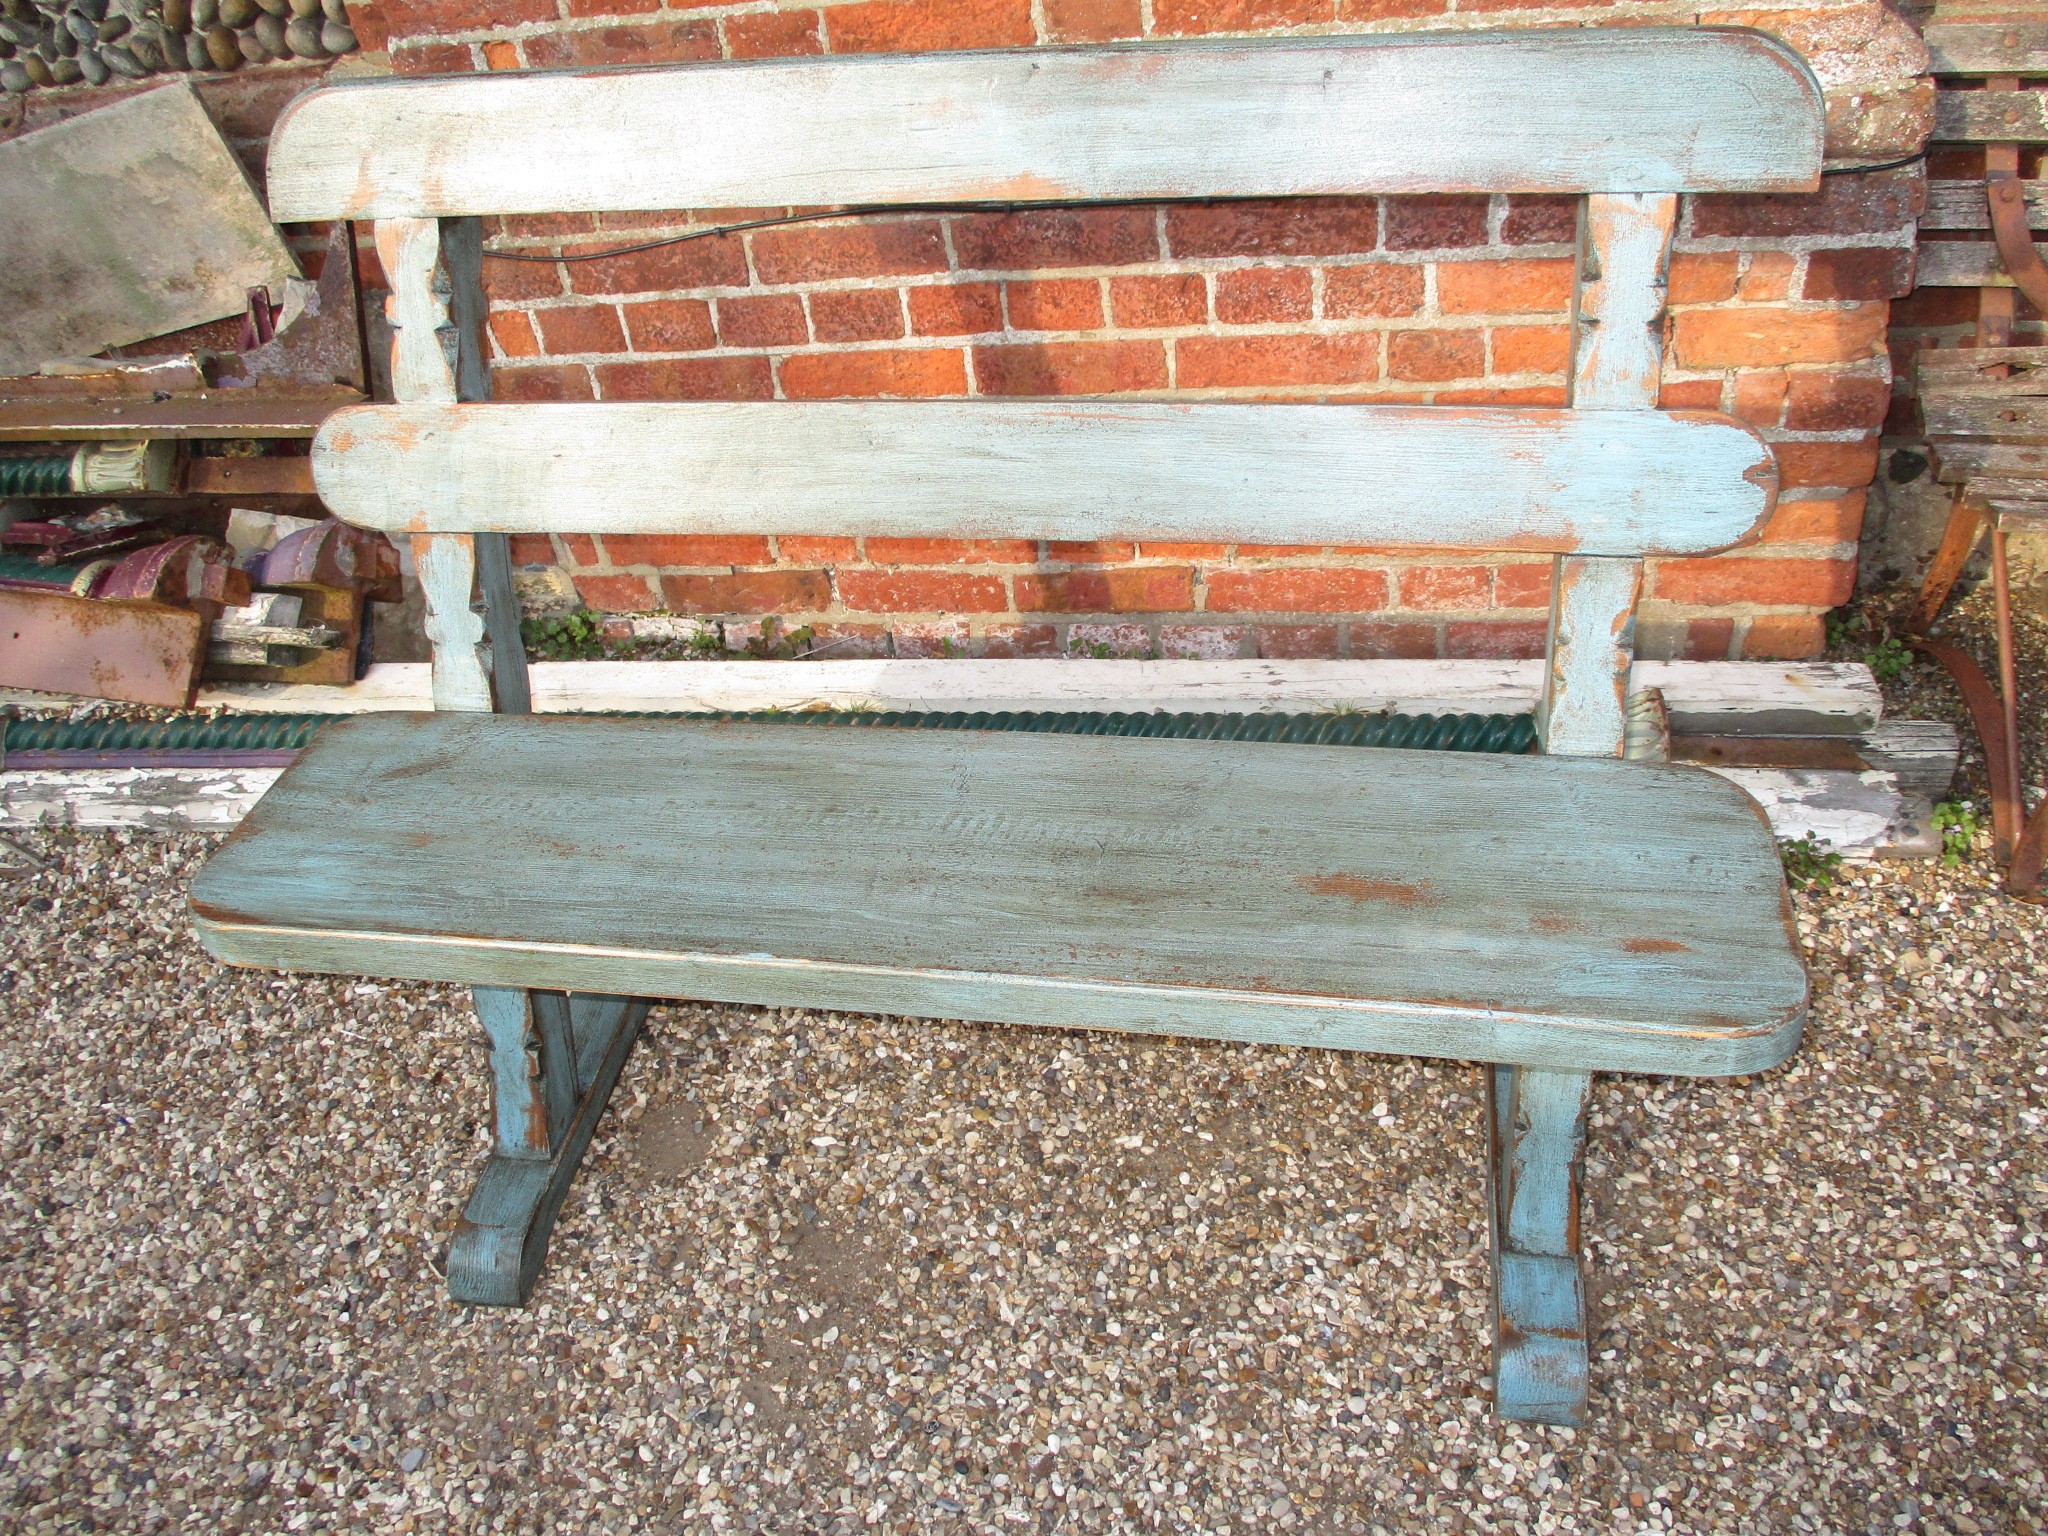 Benches as in stock